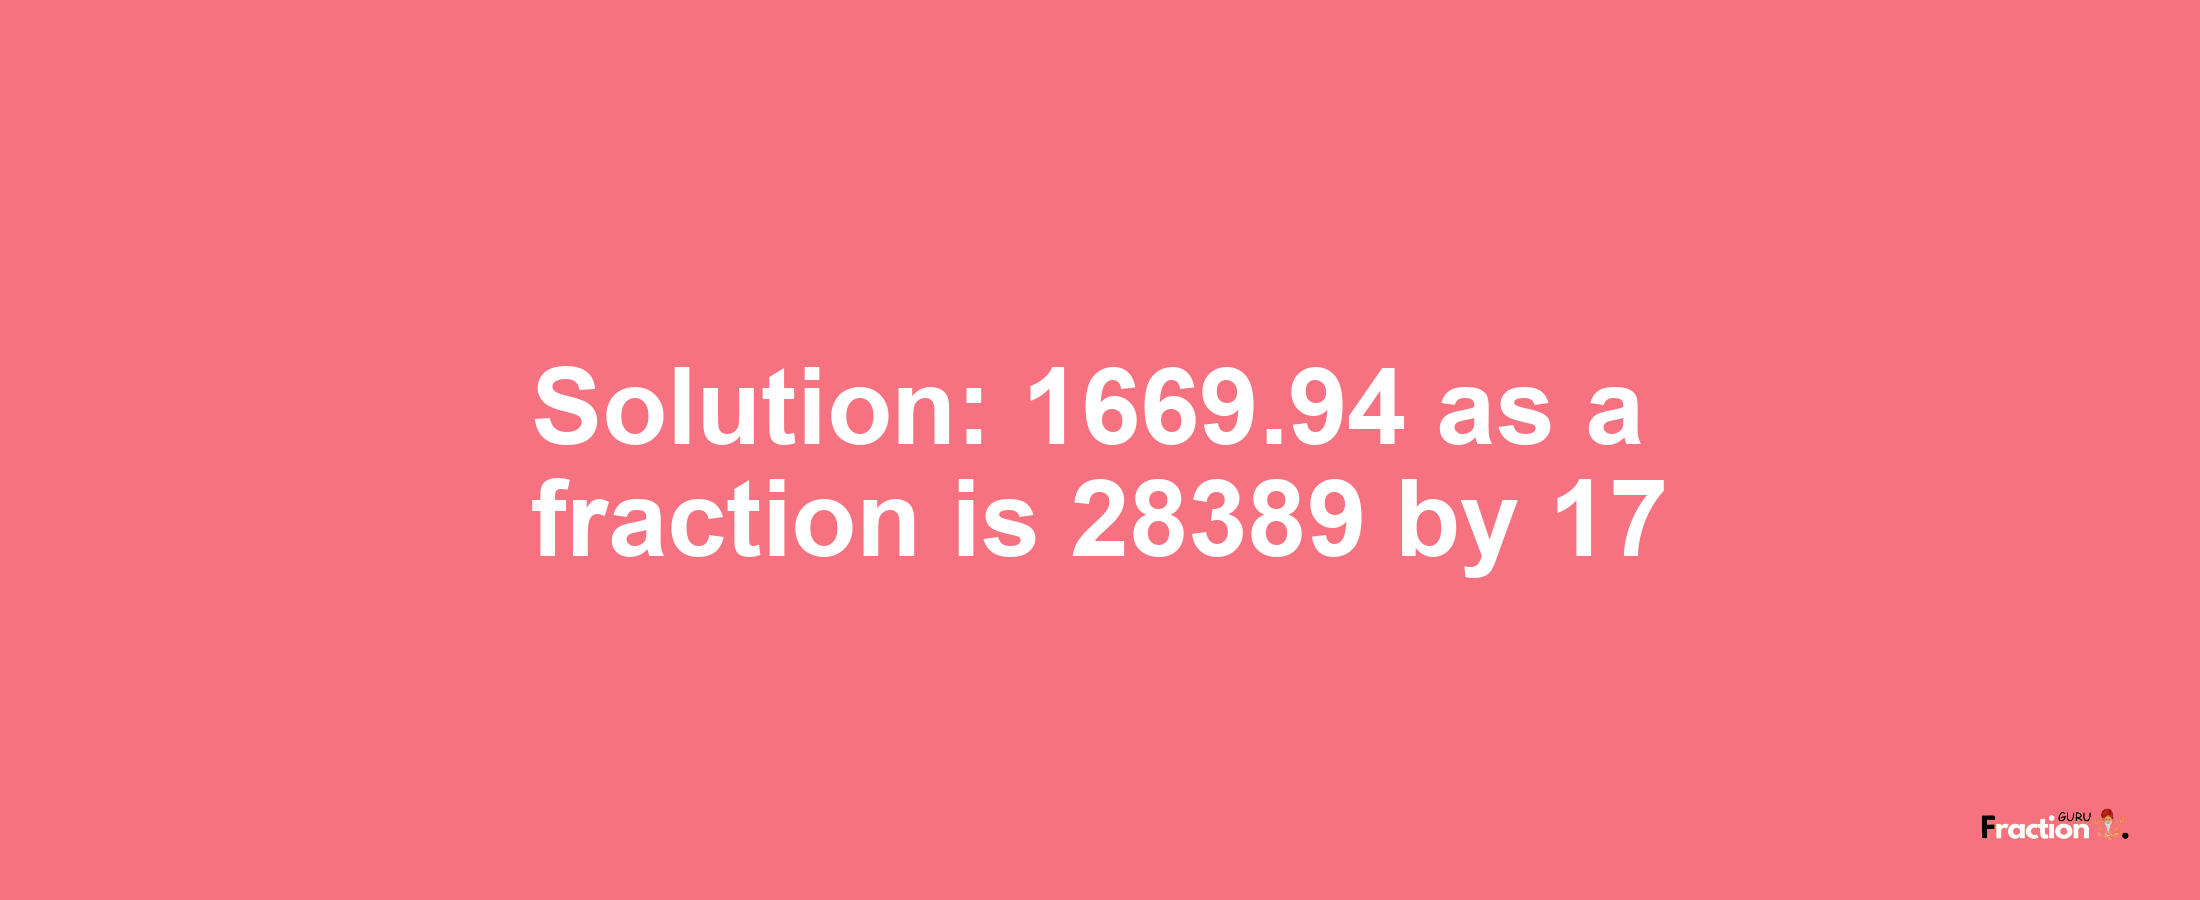 Solution:1669.94 as a fraction is 28389/17